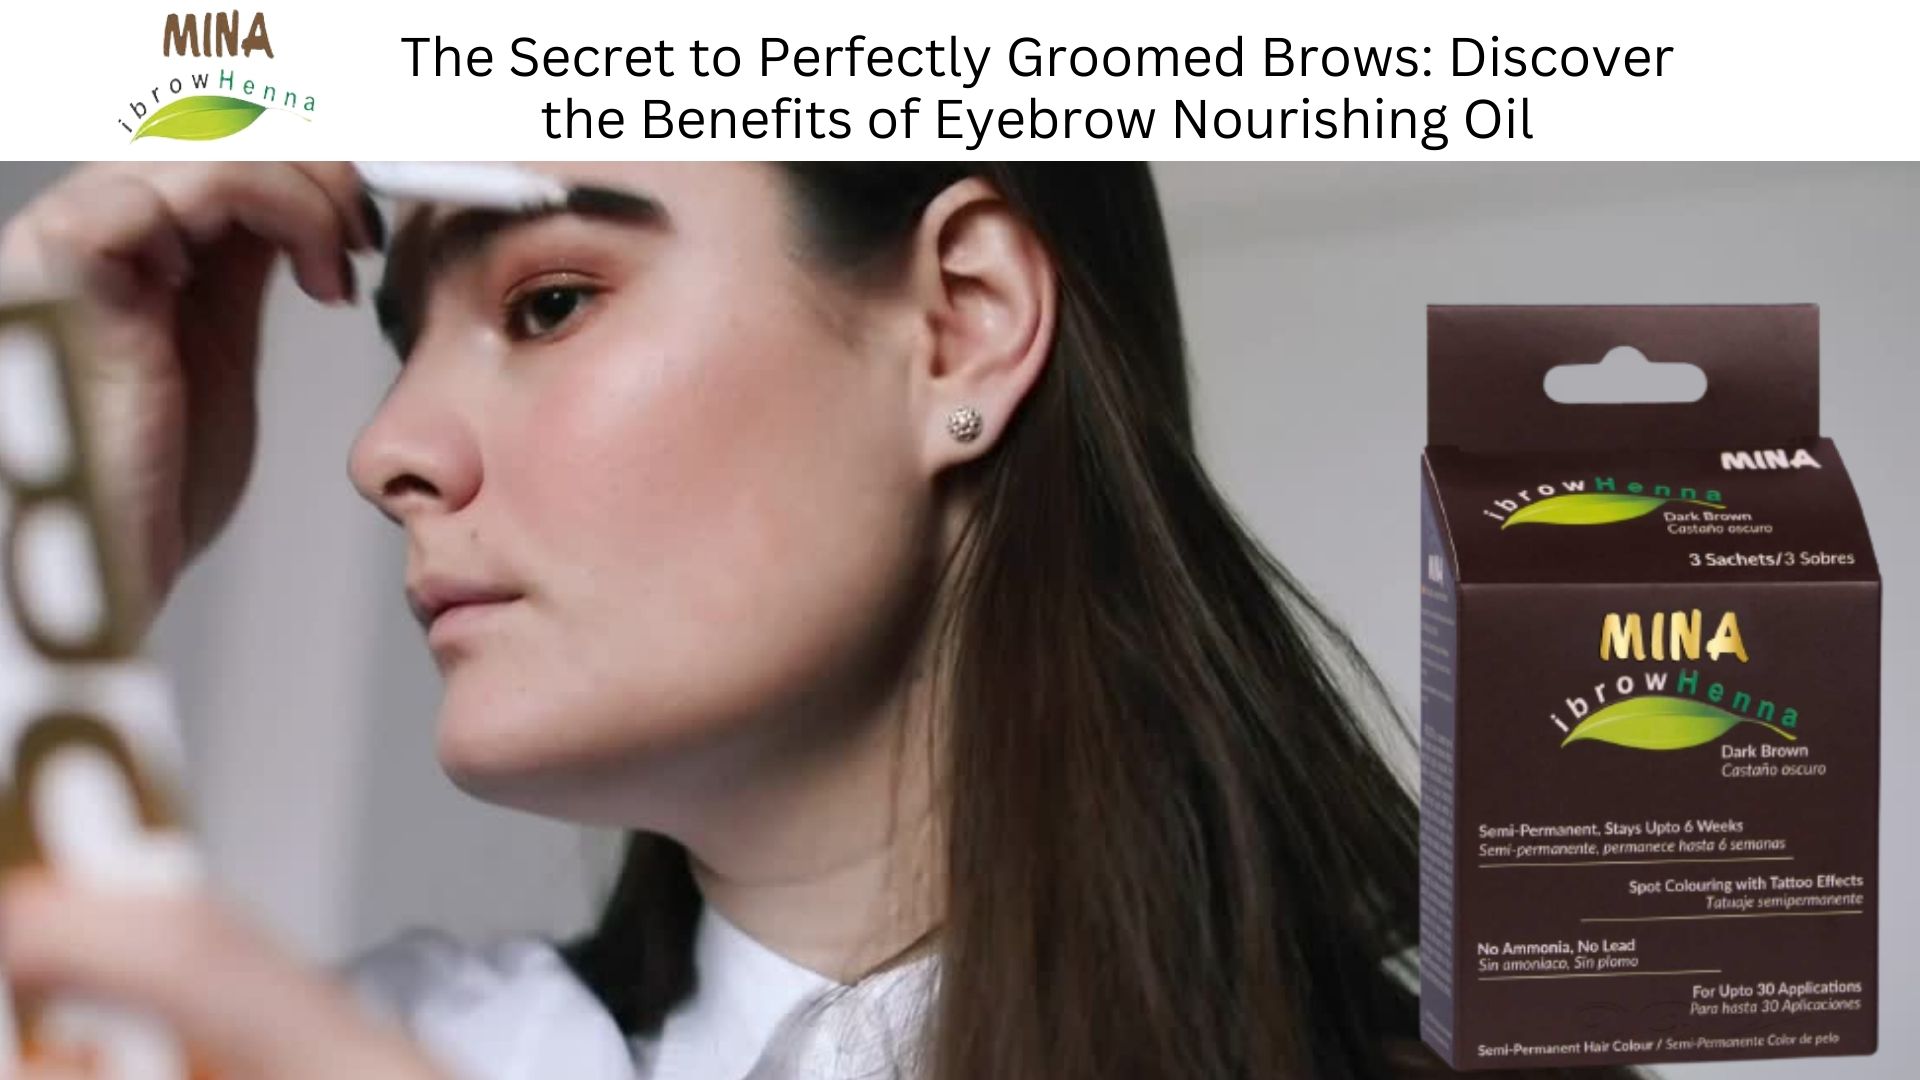 The-Secret-to-Perfectly-Groomed-Brows-Discover-the-Benefits-of-Eyebrow-Nourishing-Oil